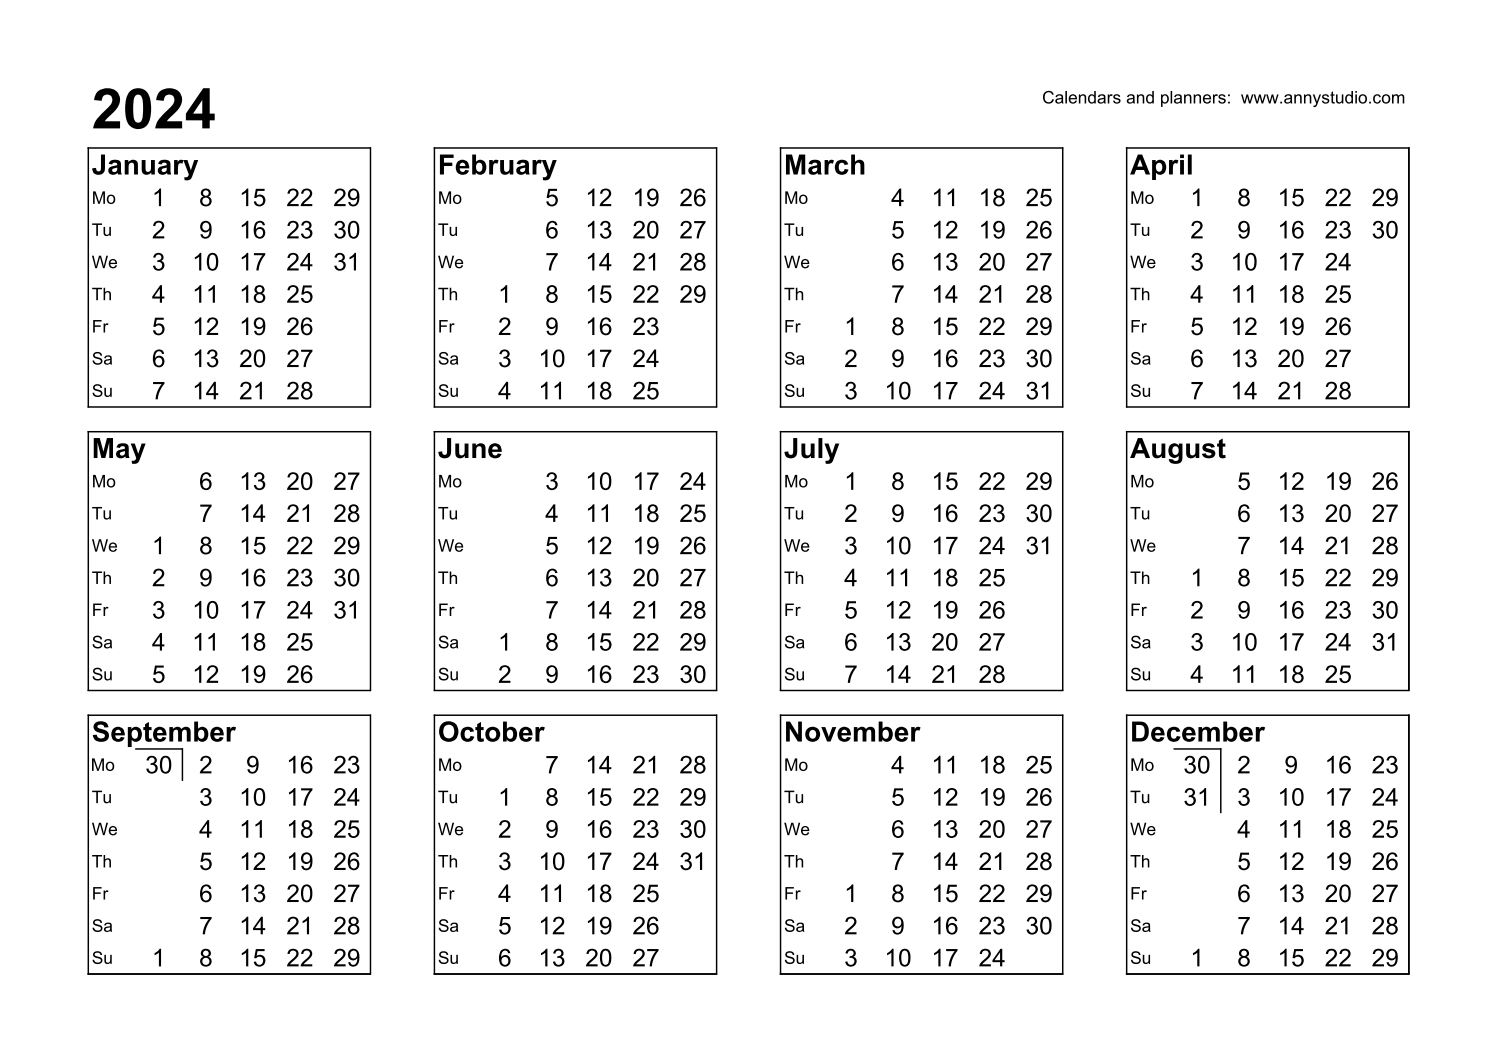 Free Printable Calendars And Planners 2024, 2025 And 2026 | Free Printable Calendar 2024 Calendarlabs